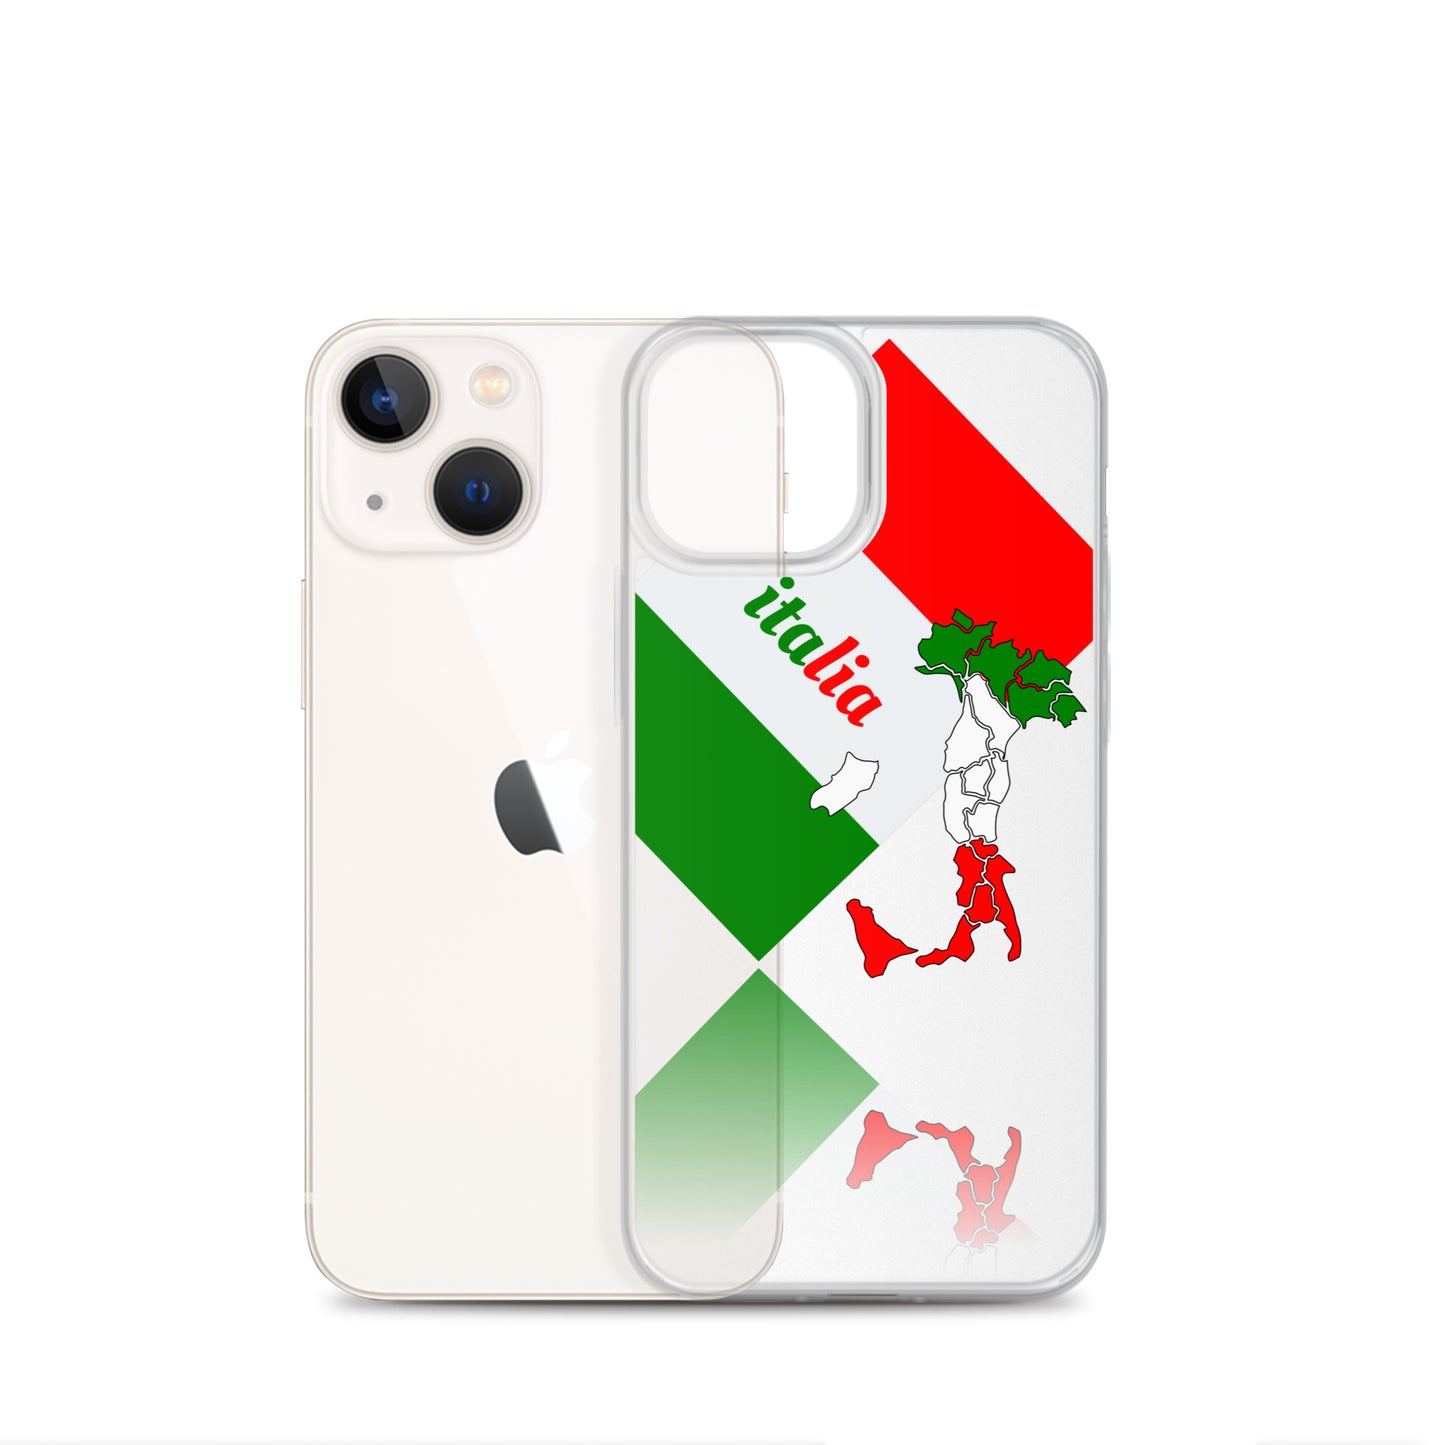 Elegant Italia - Italy Flag And Map Clear iPhone Case